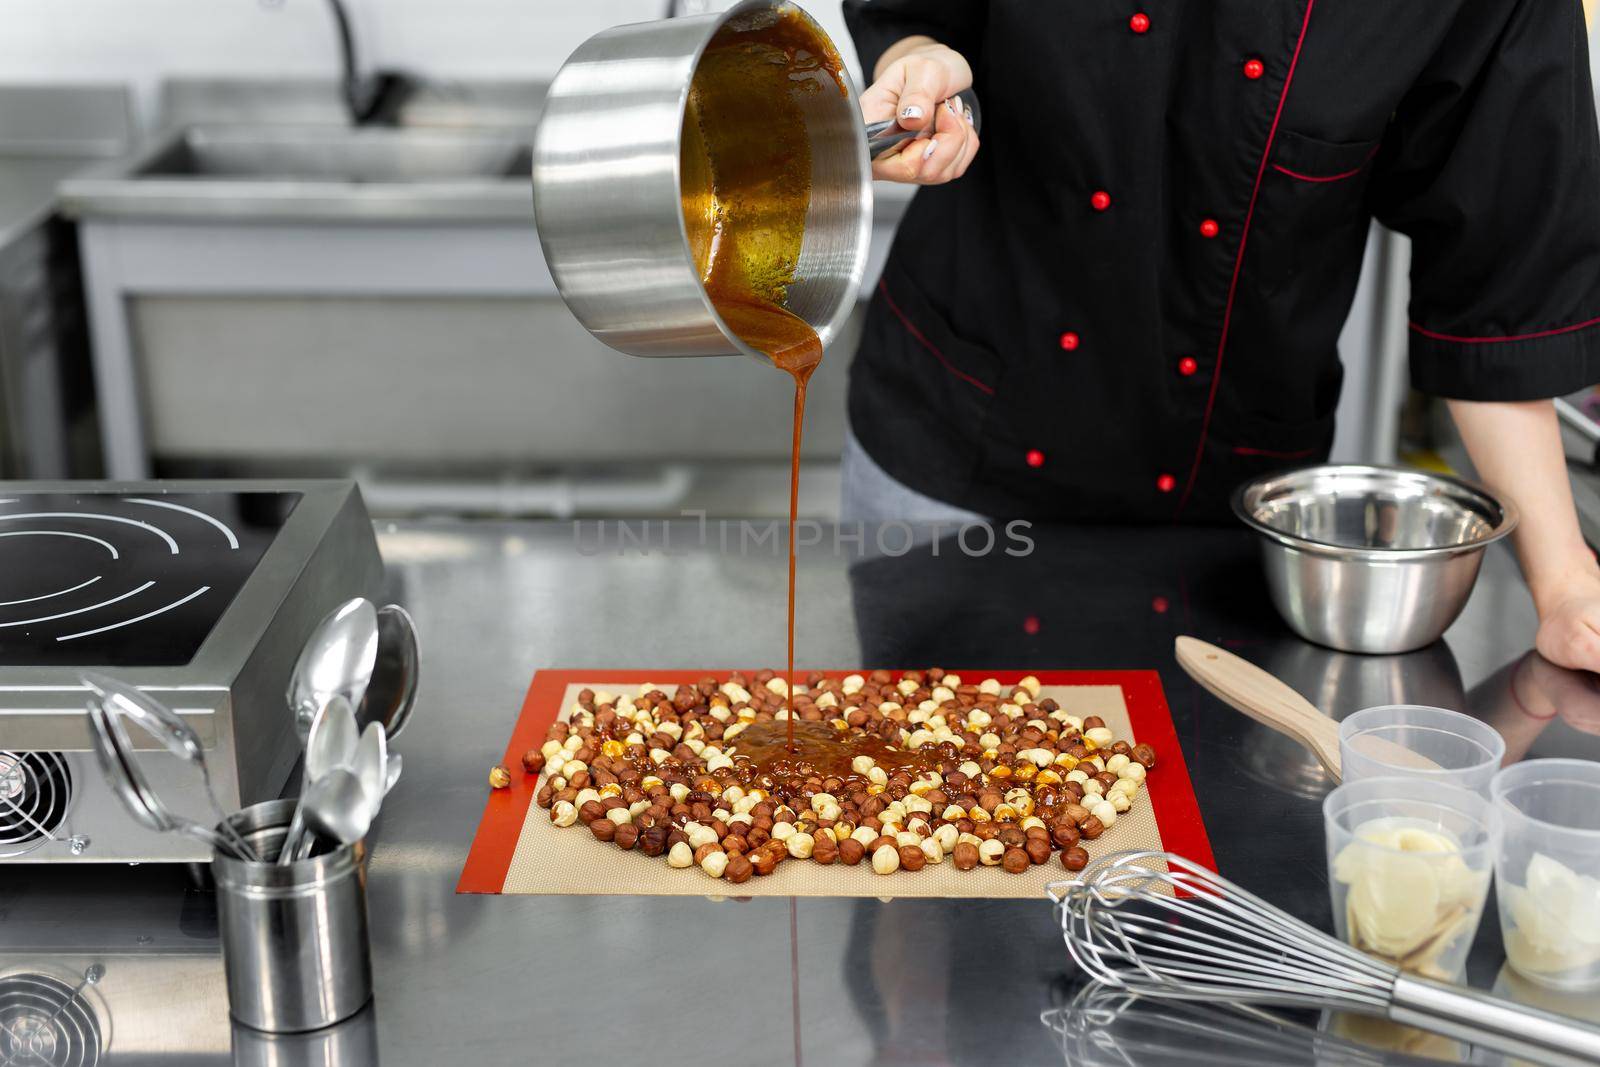 Pastry chef pours hot syrup, caramel on hazelnuts to make praline